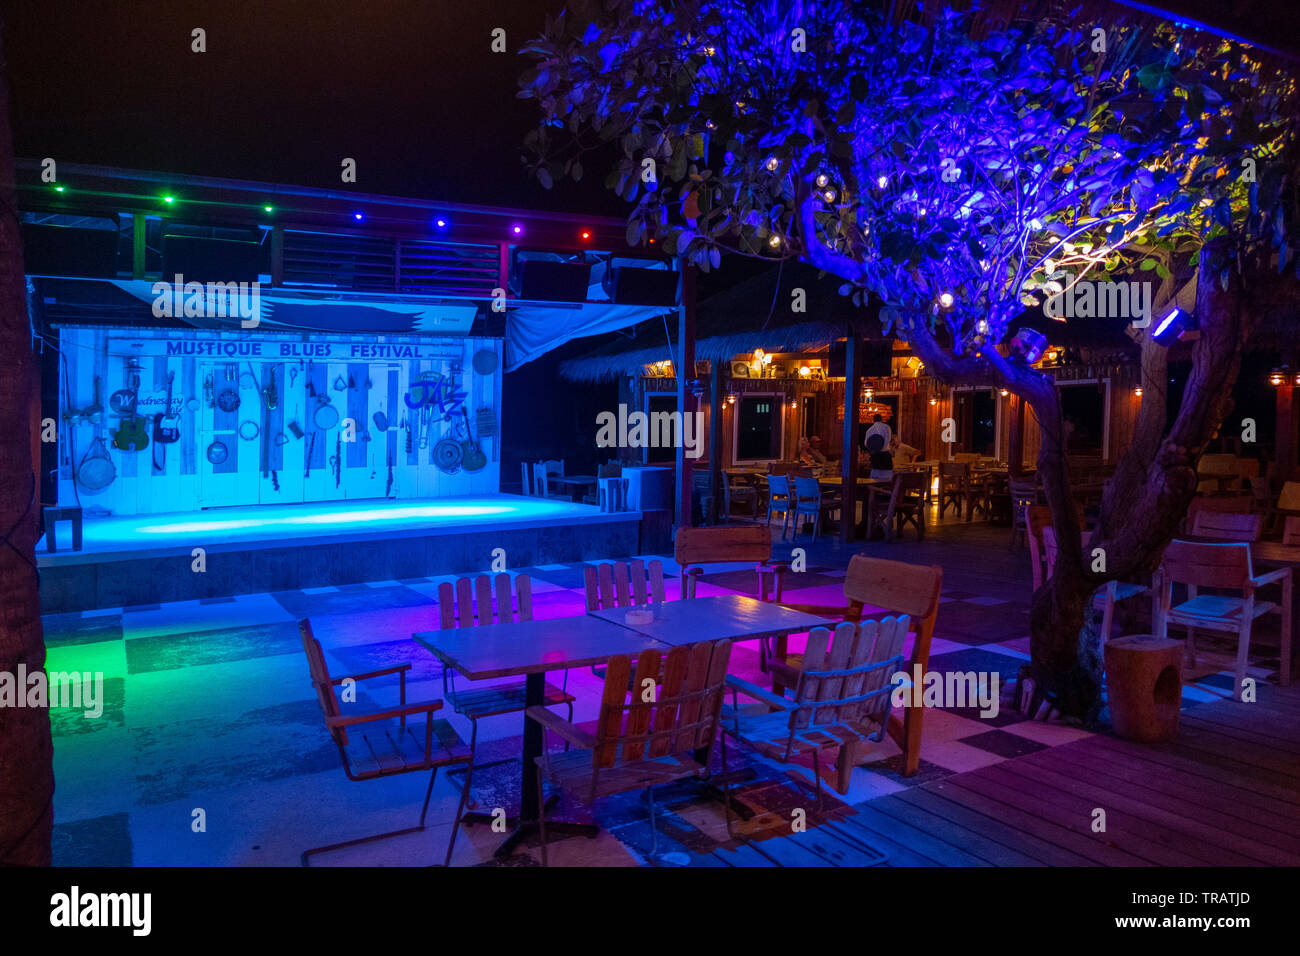 Refurbished Bar and Dance floor at Basil's Bar Mustique, 2019. It's a Caribbean restaurant and venue for the Mustique Blues Festival. Used by all Stock Photo